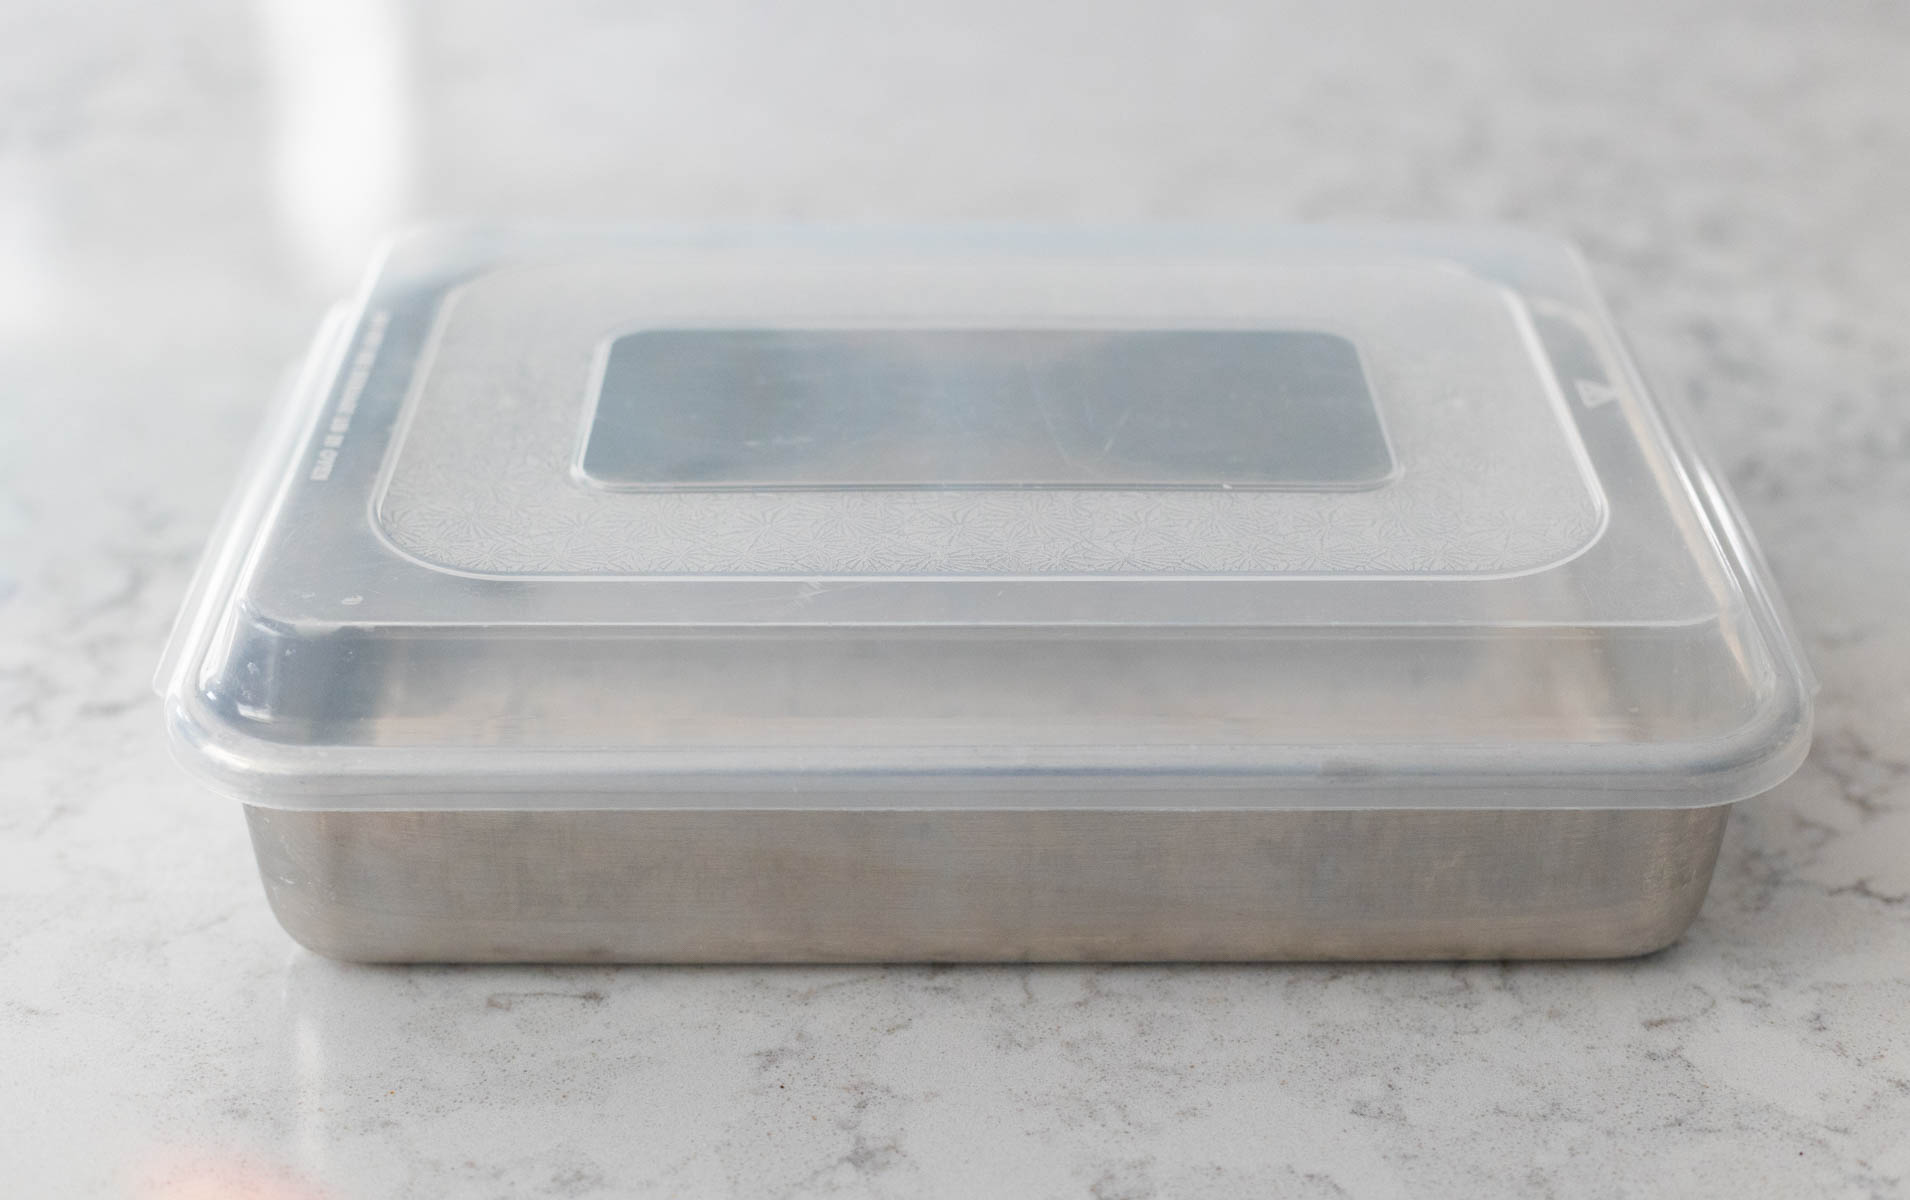 A 9x13-inch baking pan has a plastic lid.